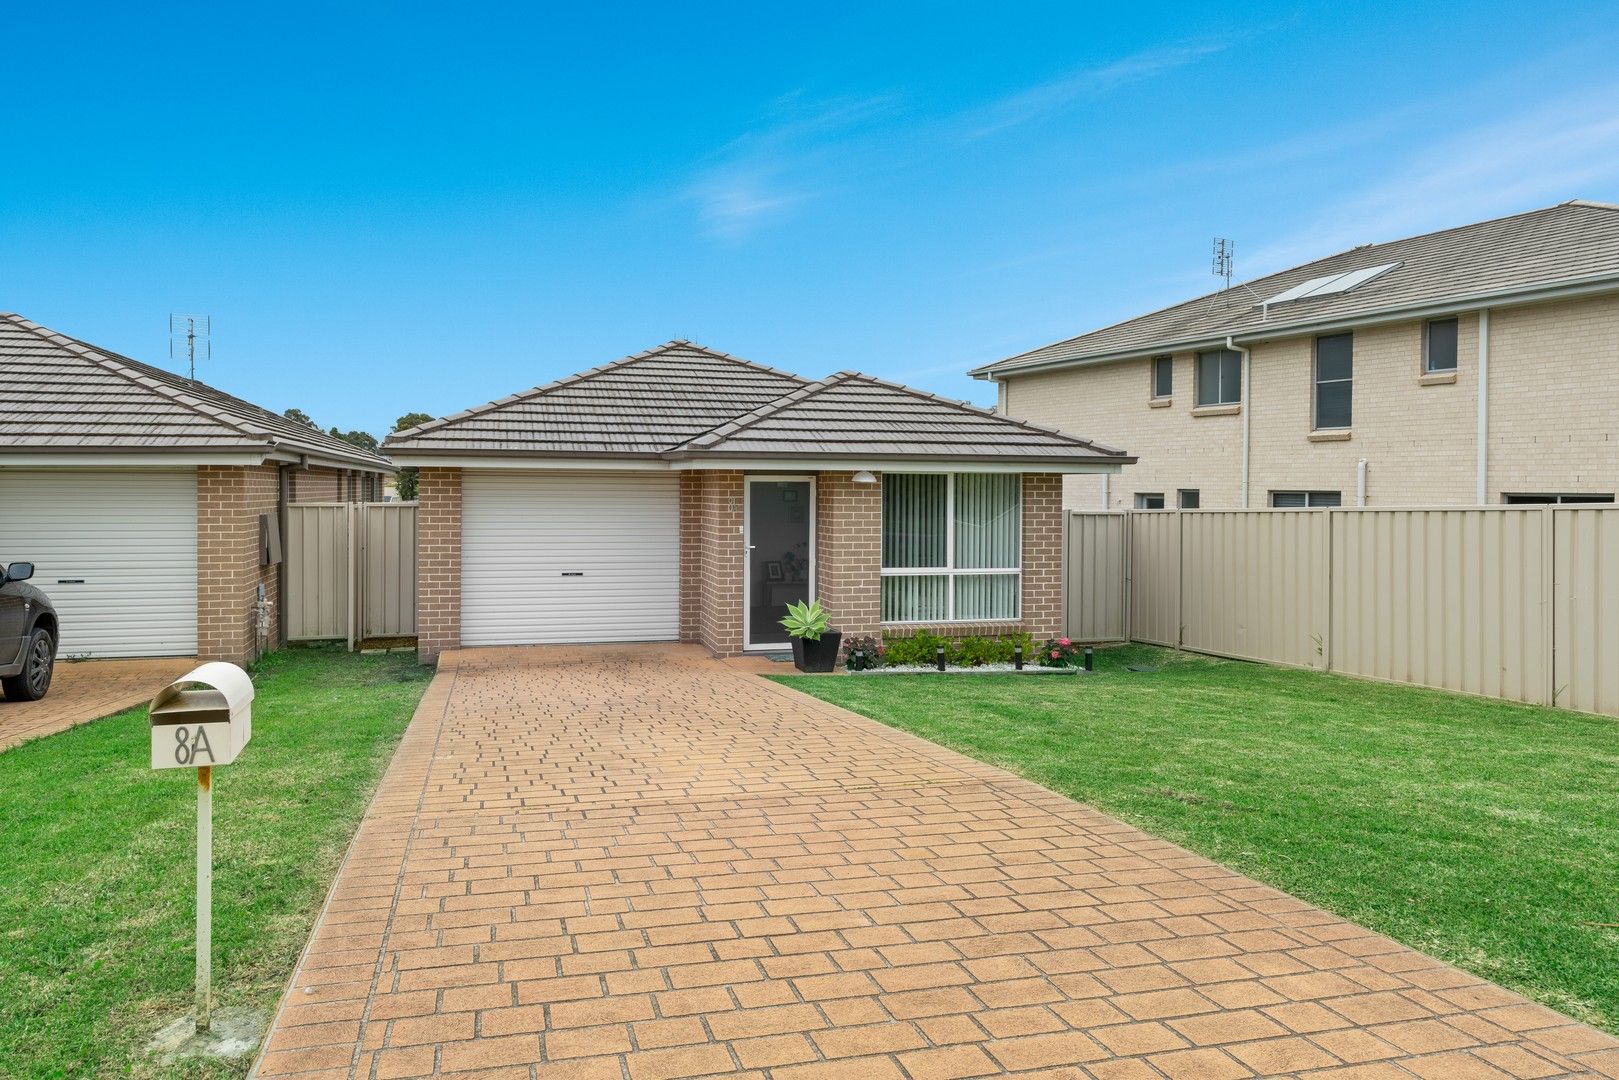 3 bedrooms House in 8a Blue Bell Way WORRIGEE NSW, 2540